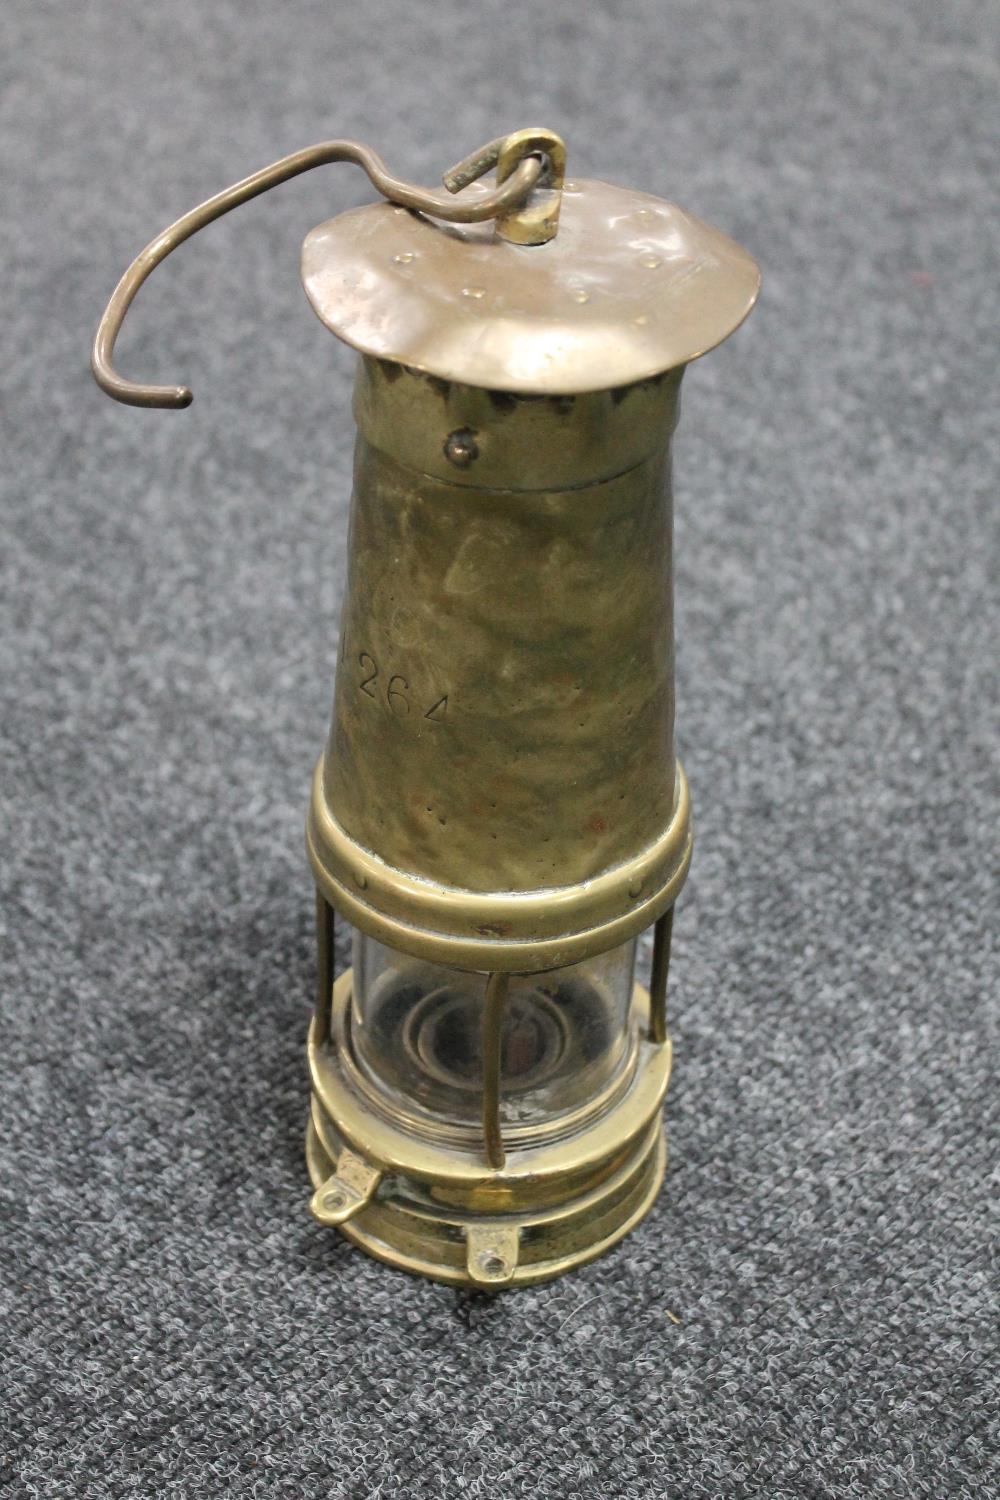 An antique brass miner's lamp numbered 1264